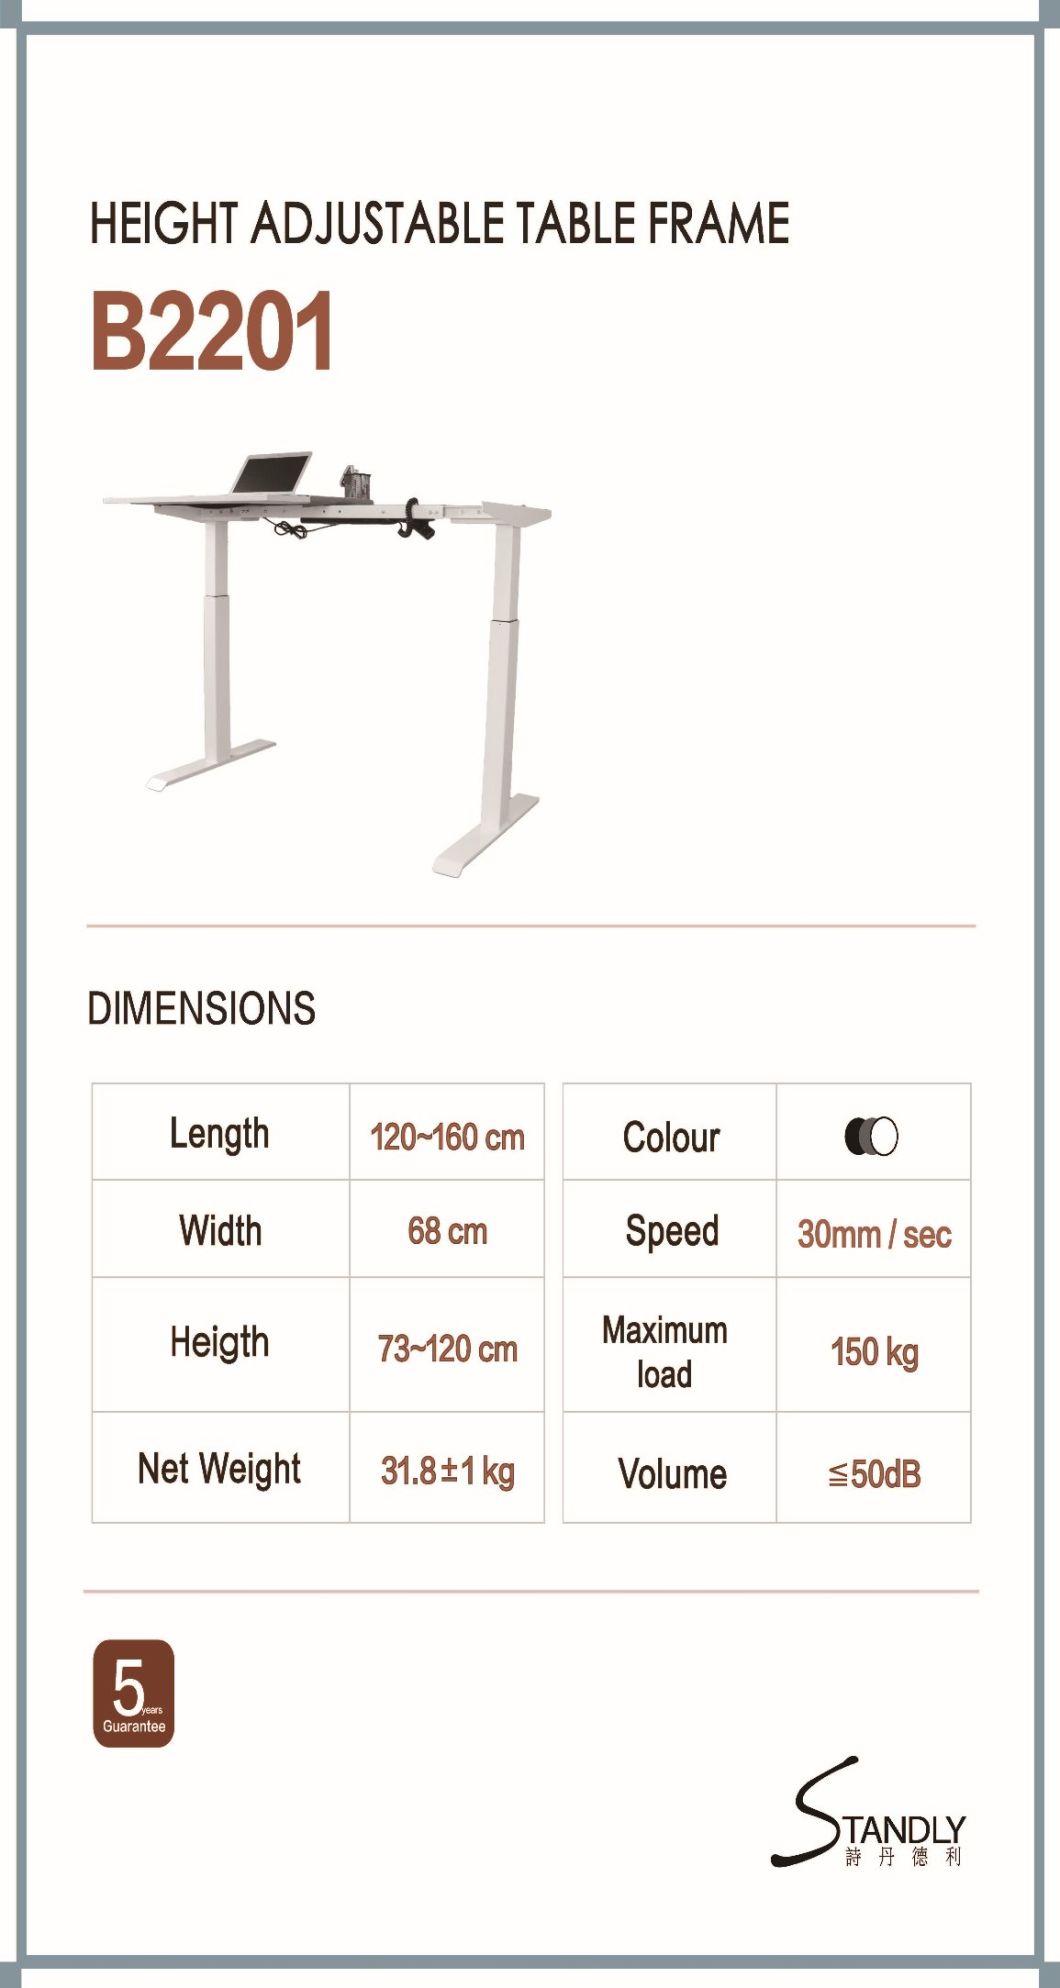 Dual Motor 3 Stages Height Adjustable Table Frame with 4 Height Poistions Setable Controller (B2302AS)